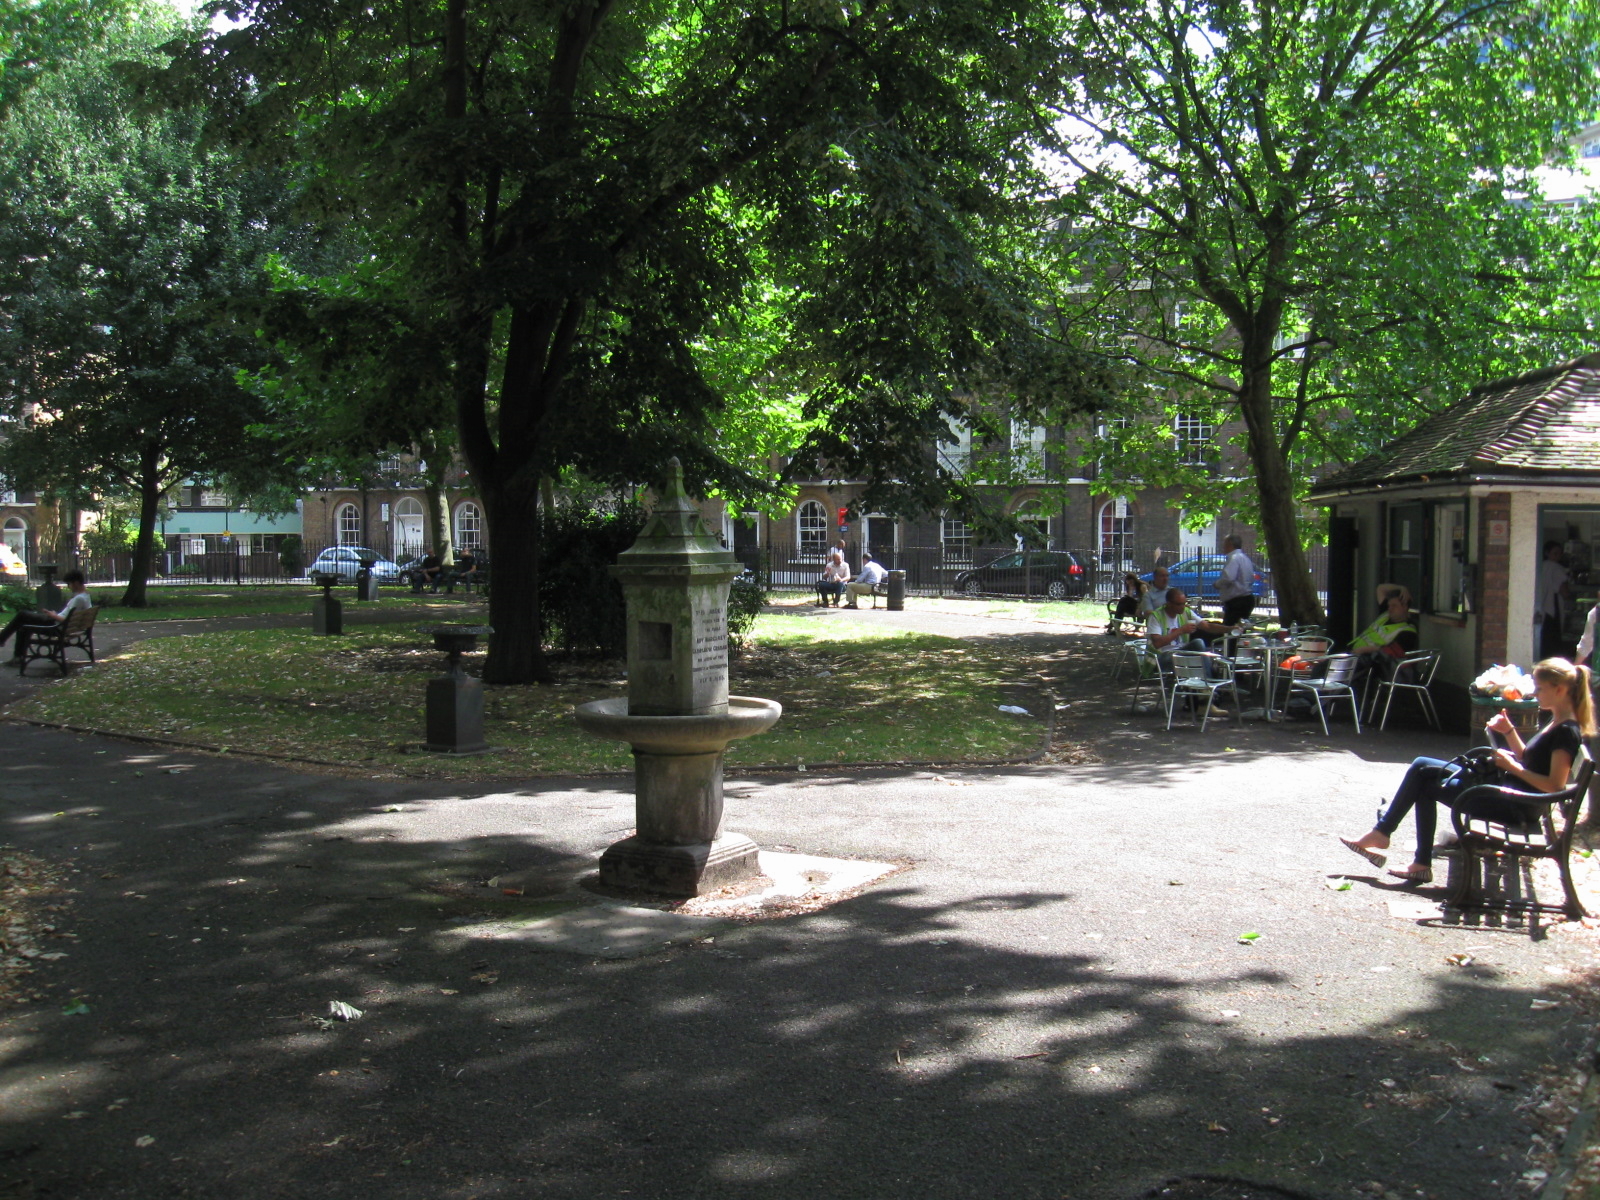 people sitting on benches near a park with lots of trees